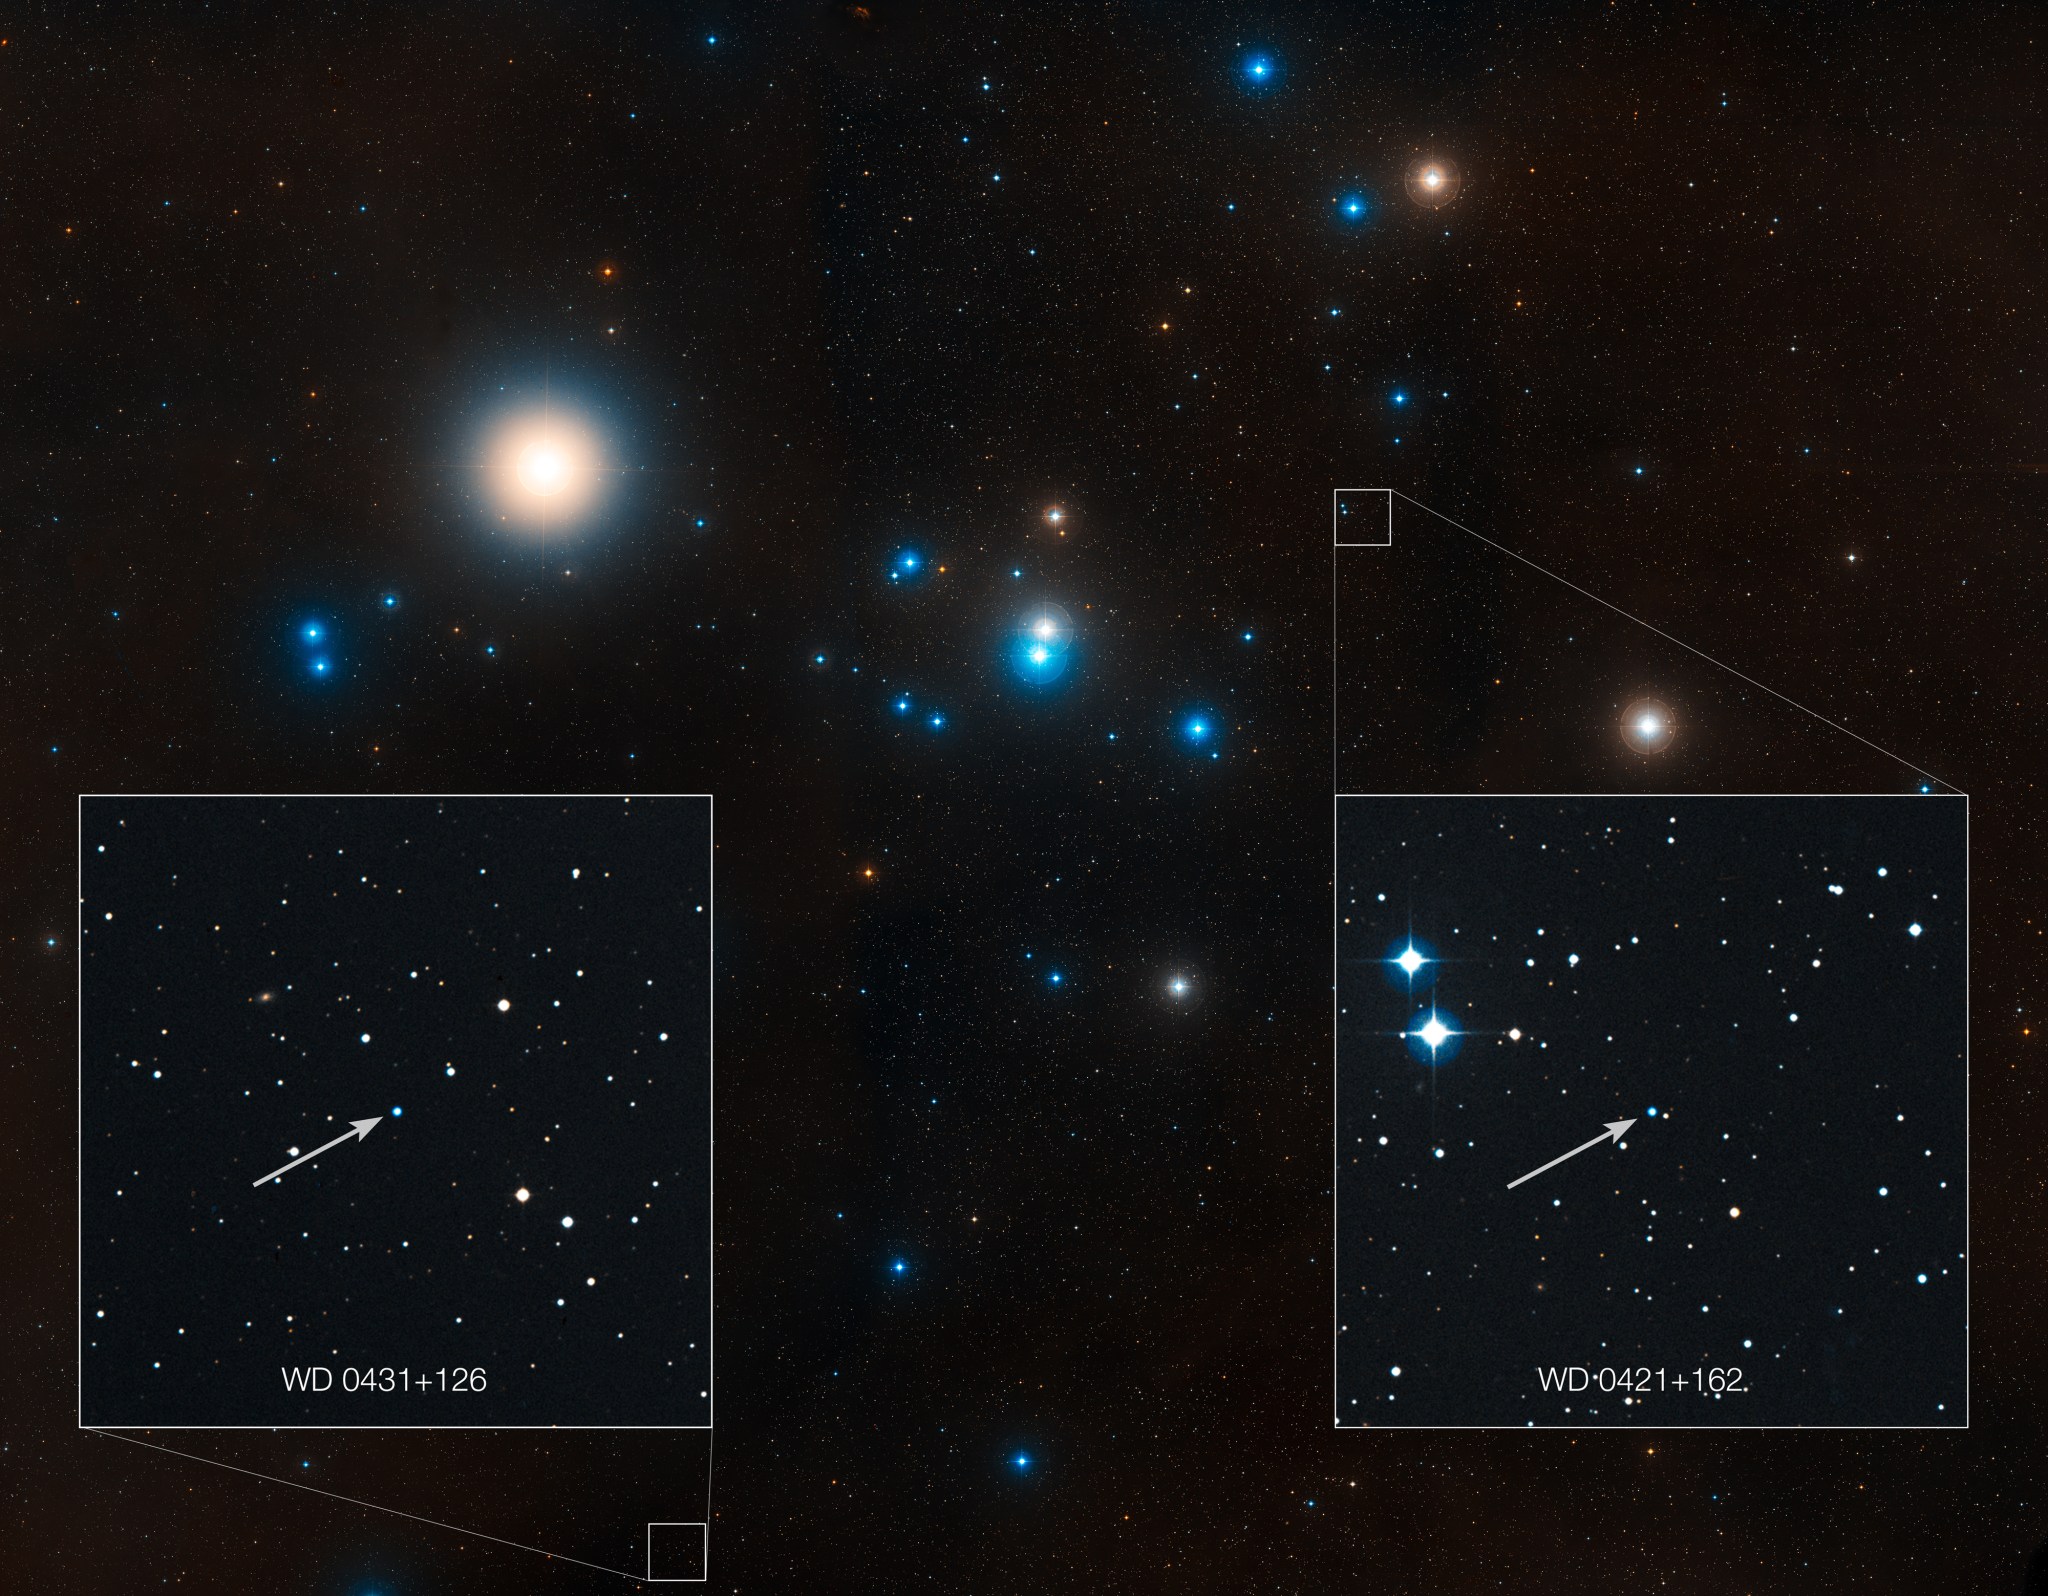 Orange and blue stars from the Hyades cluster on a dark background with two stars labelled: WD 0421+162, and WD 0431+126